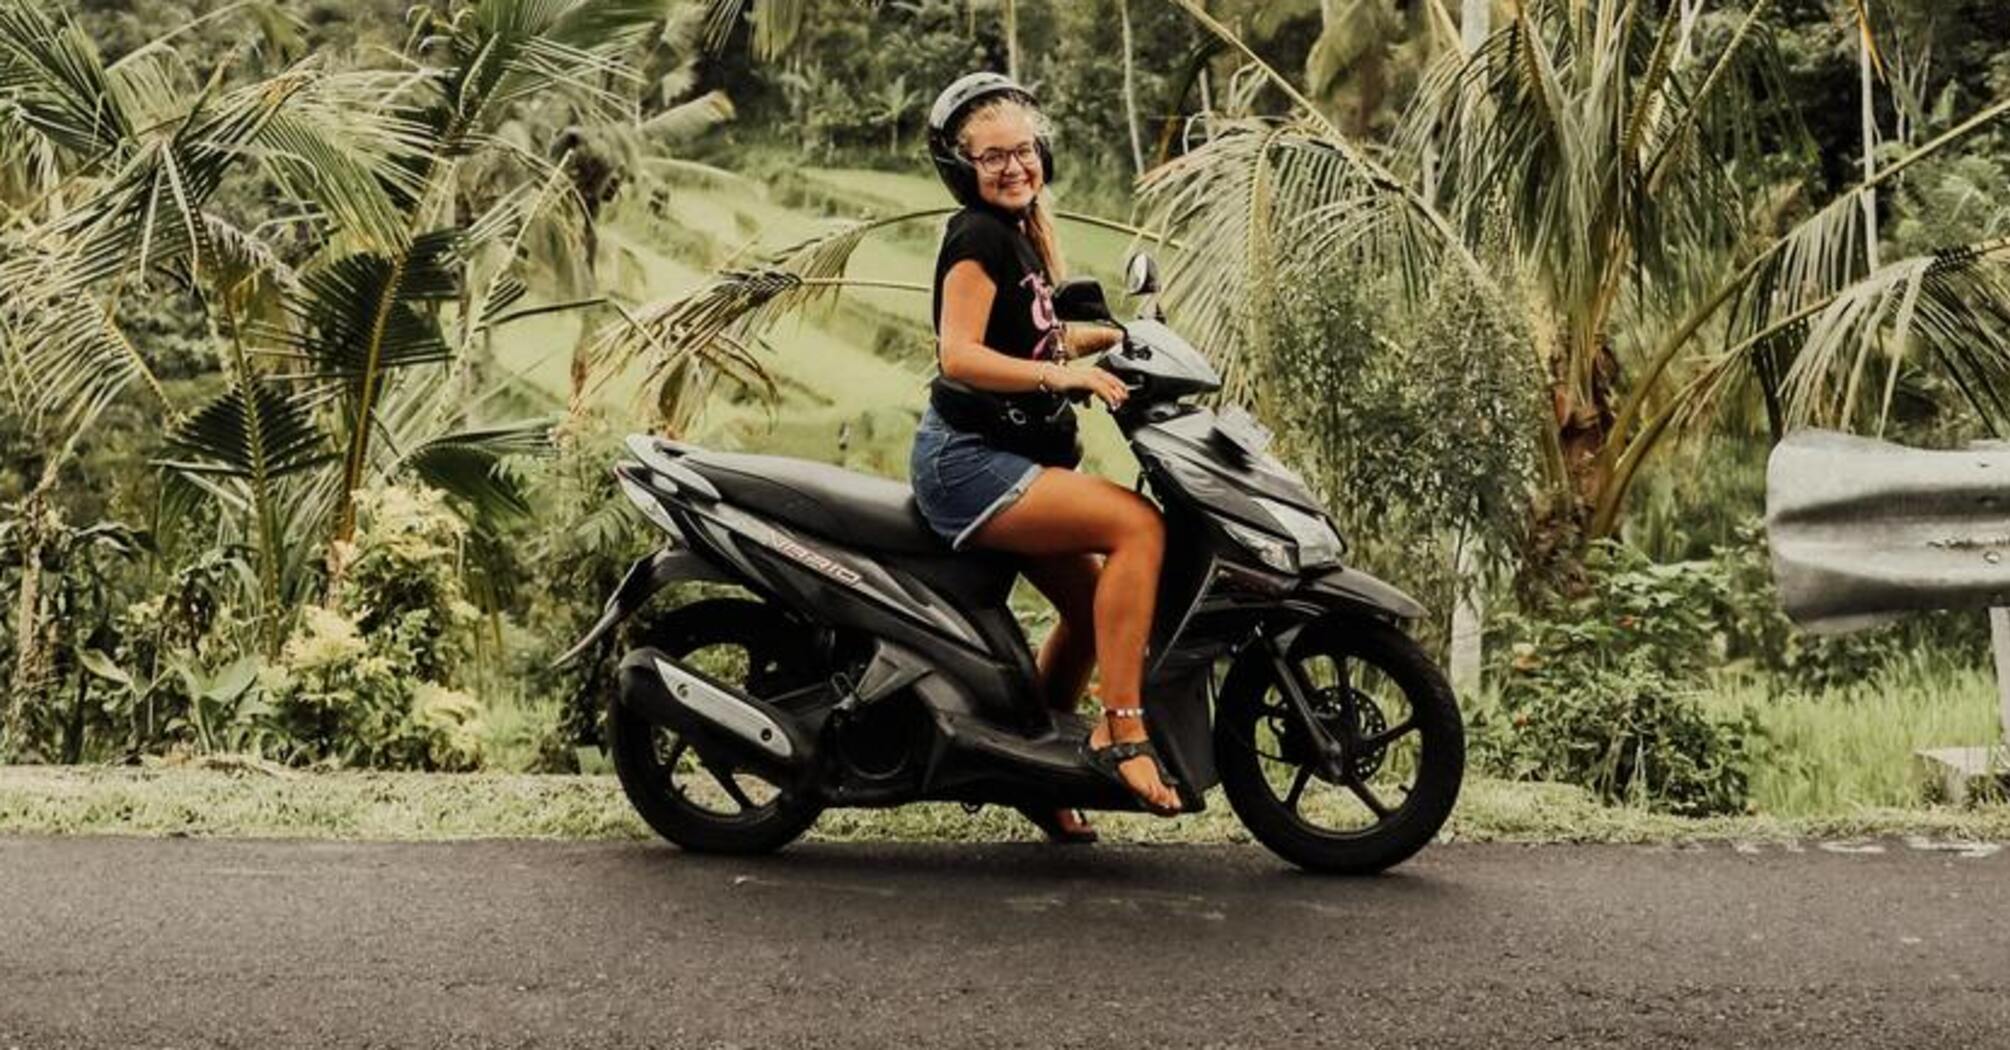 Bali urges Russian tourists to 'dress more modestly' as women riding scooters in bikinis distract drivers